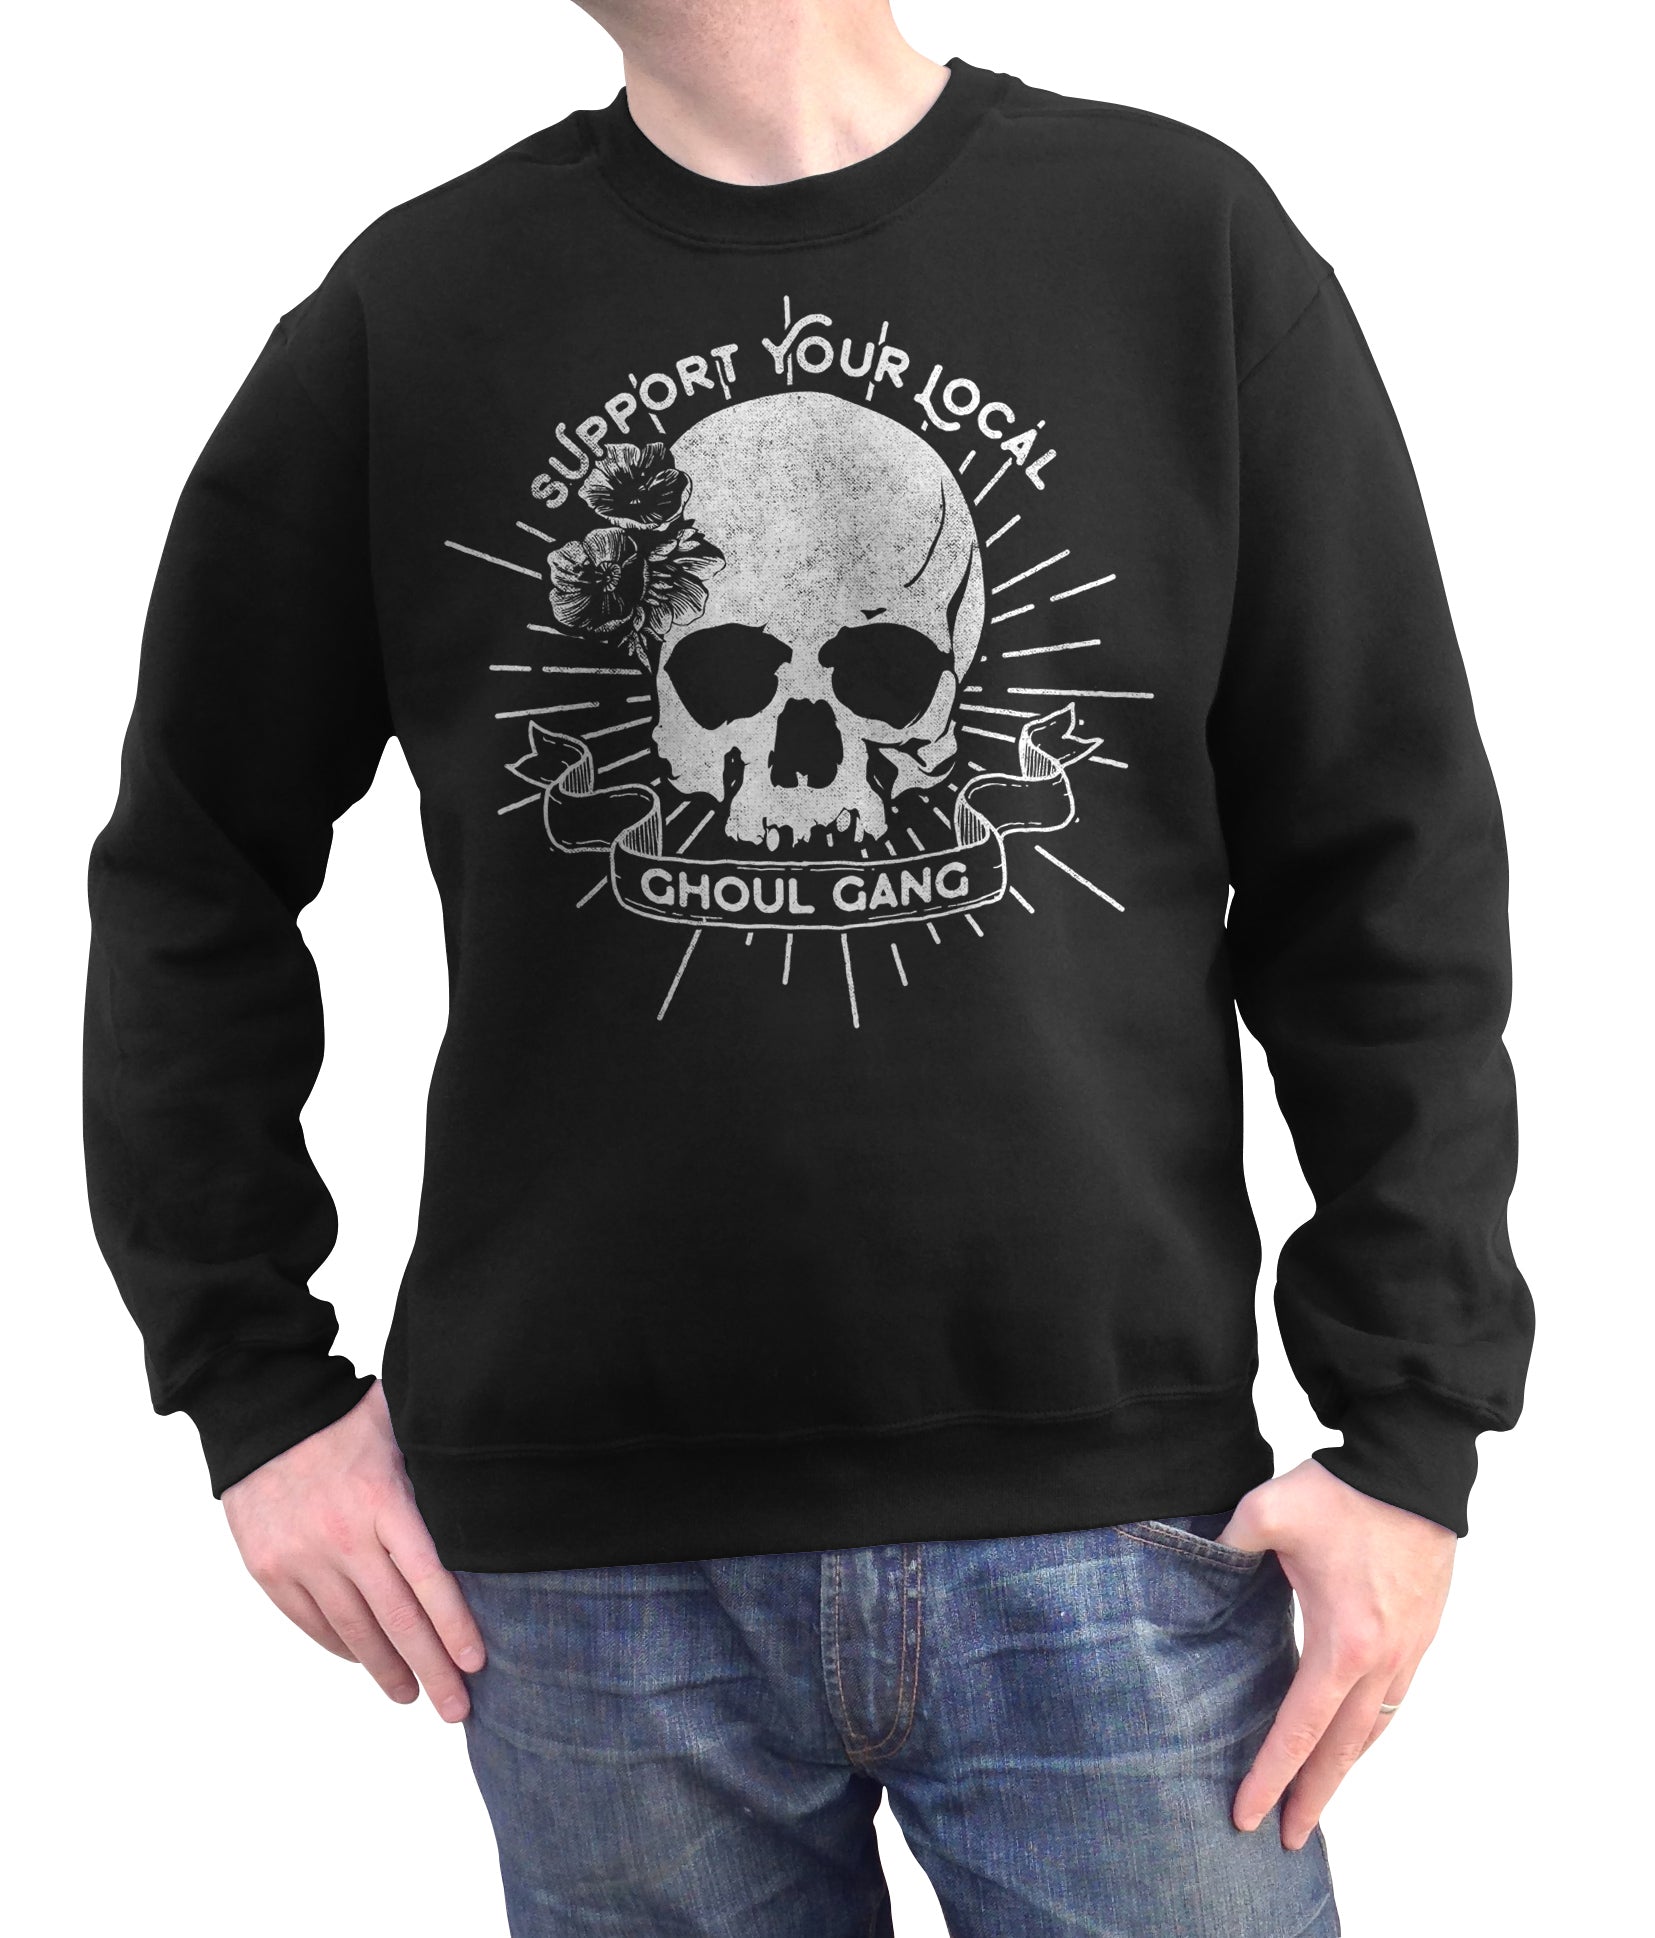 Unisex Support Your Local Ghoul Gang Sweatshirt